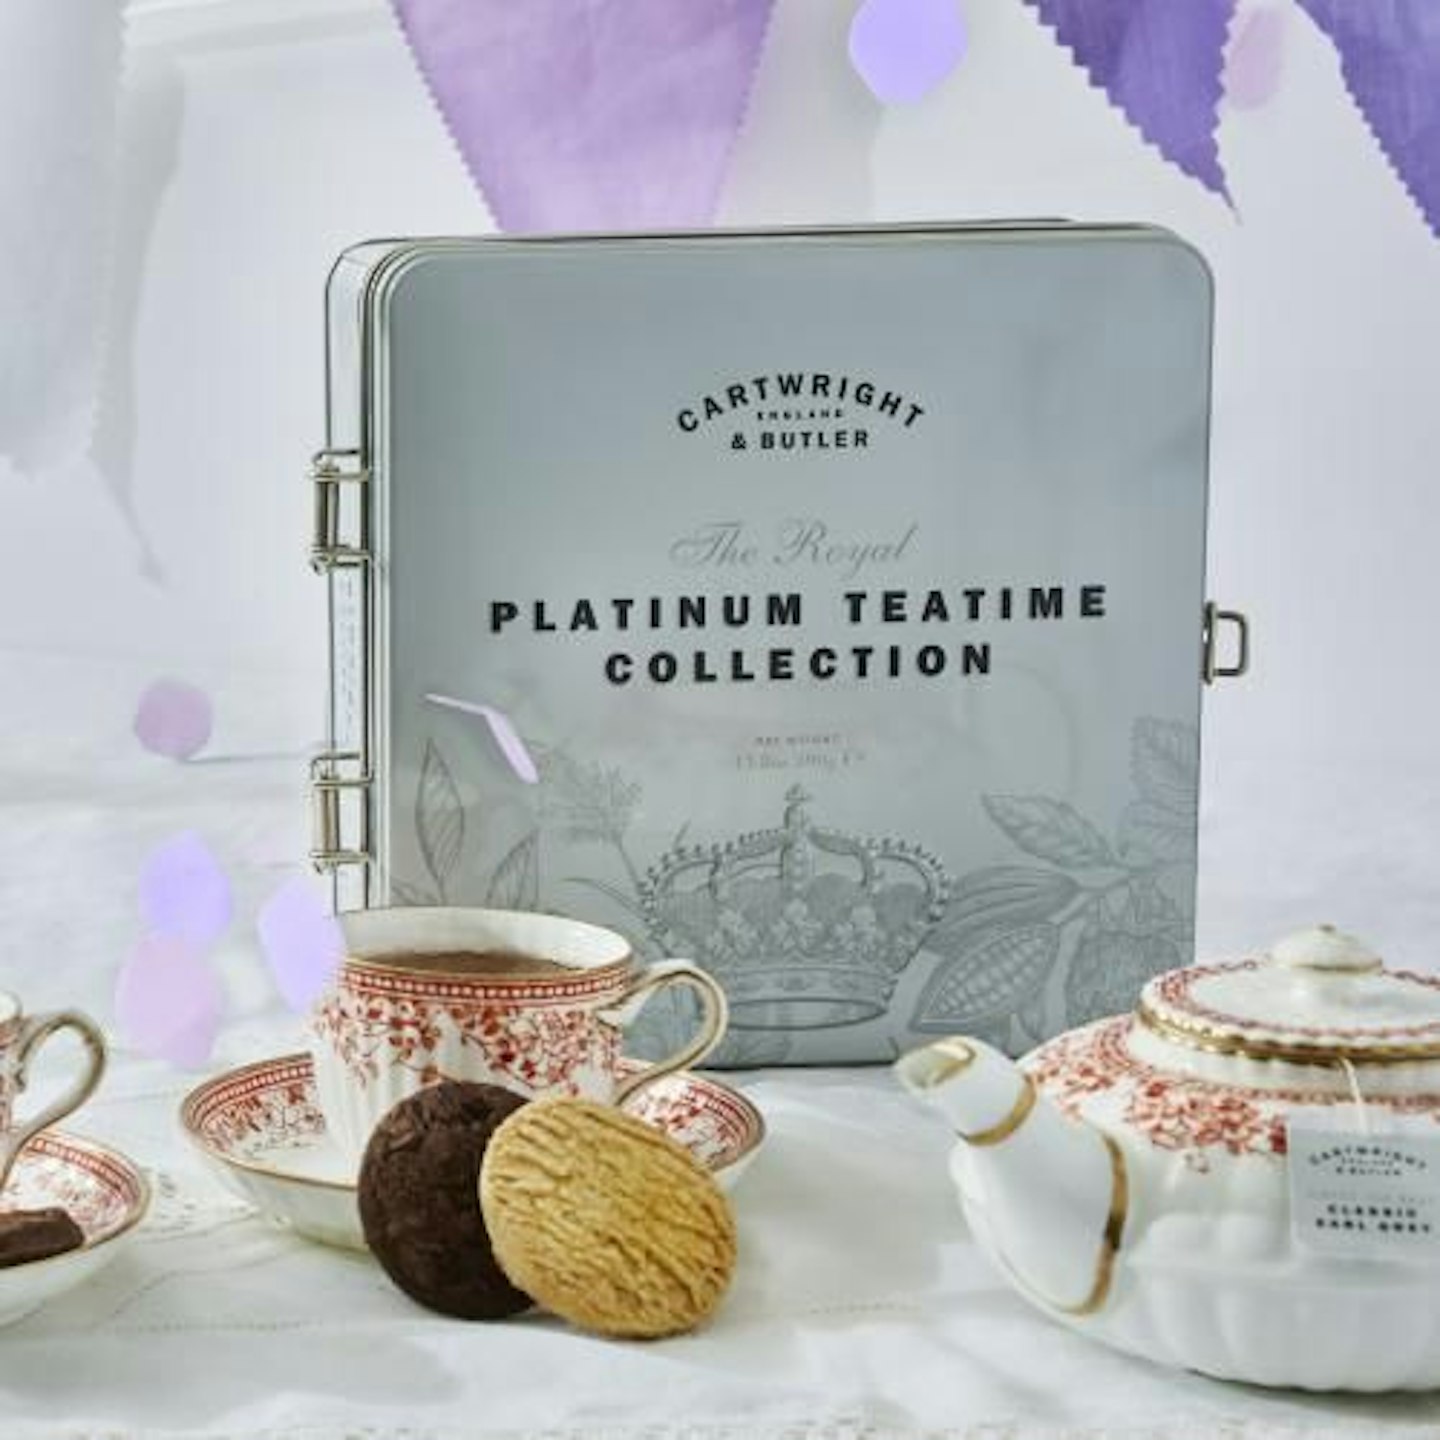 Cartwright & Butler Platinum Jubilee Collection